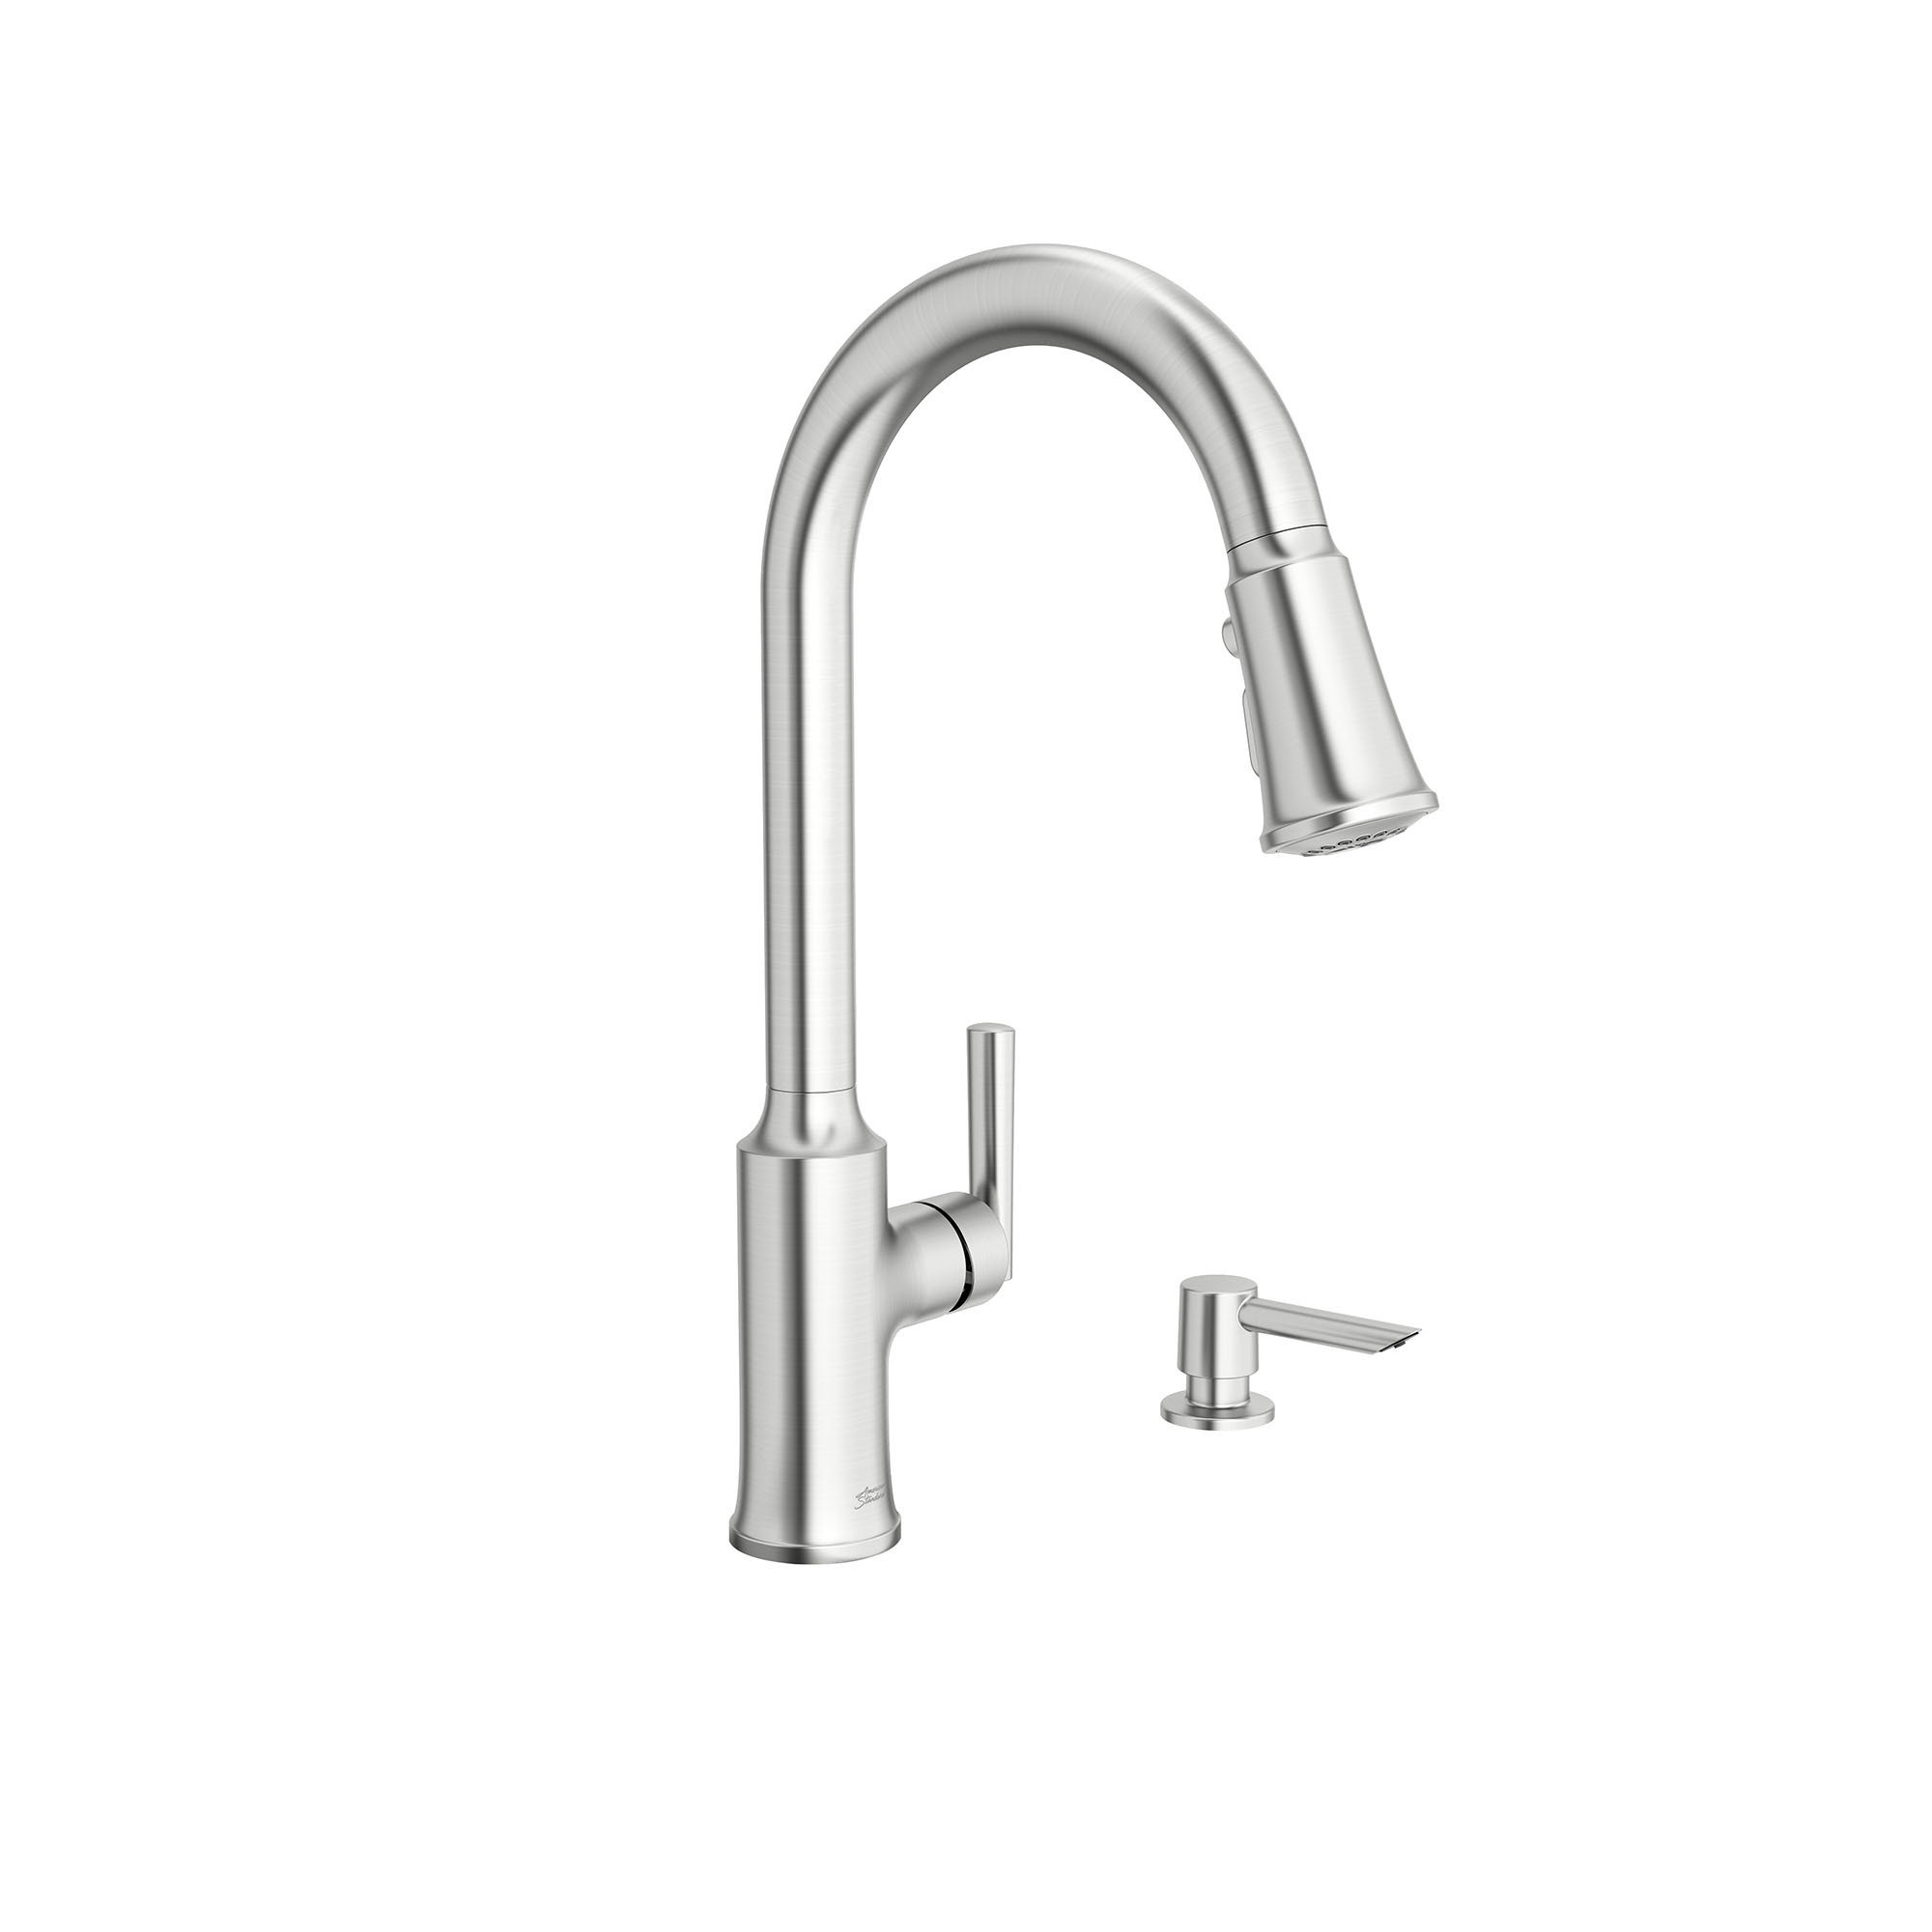 Chrome Plated Steel Faucet Spacer Over the Sink Shelf with Cutlery Holder, KITCHEN ORGANIZATION